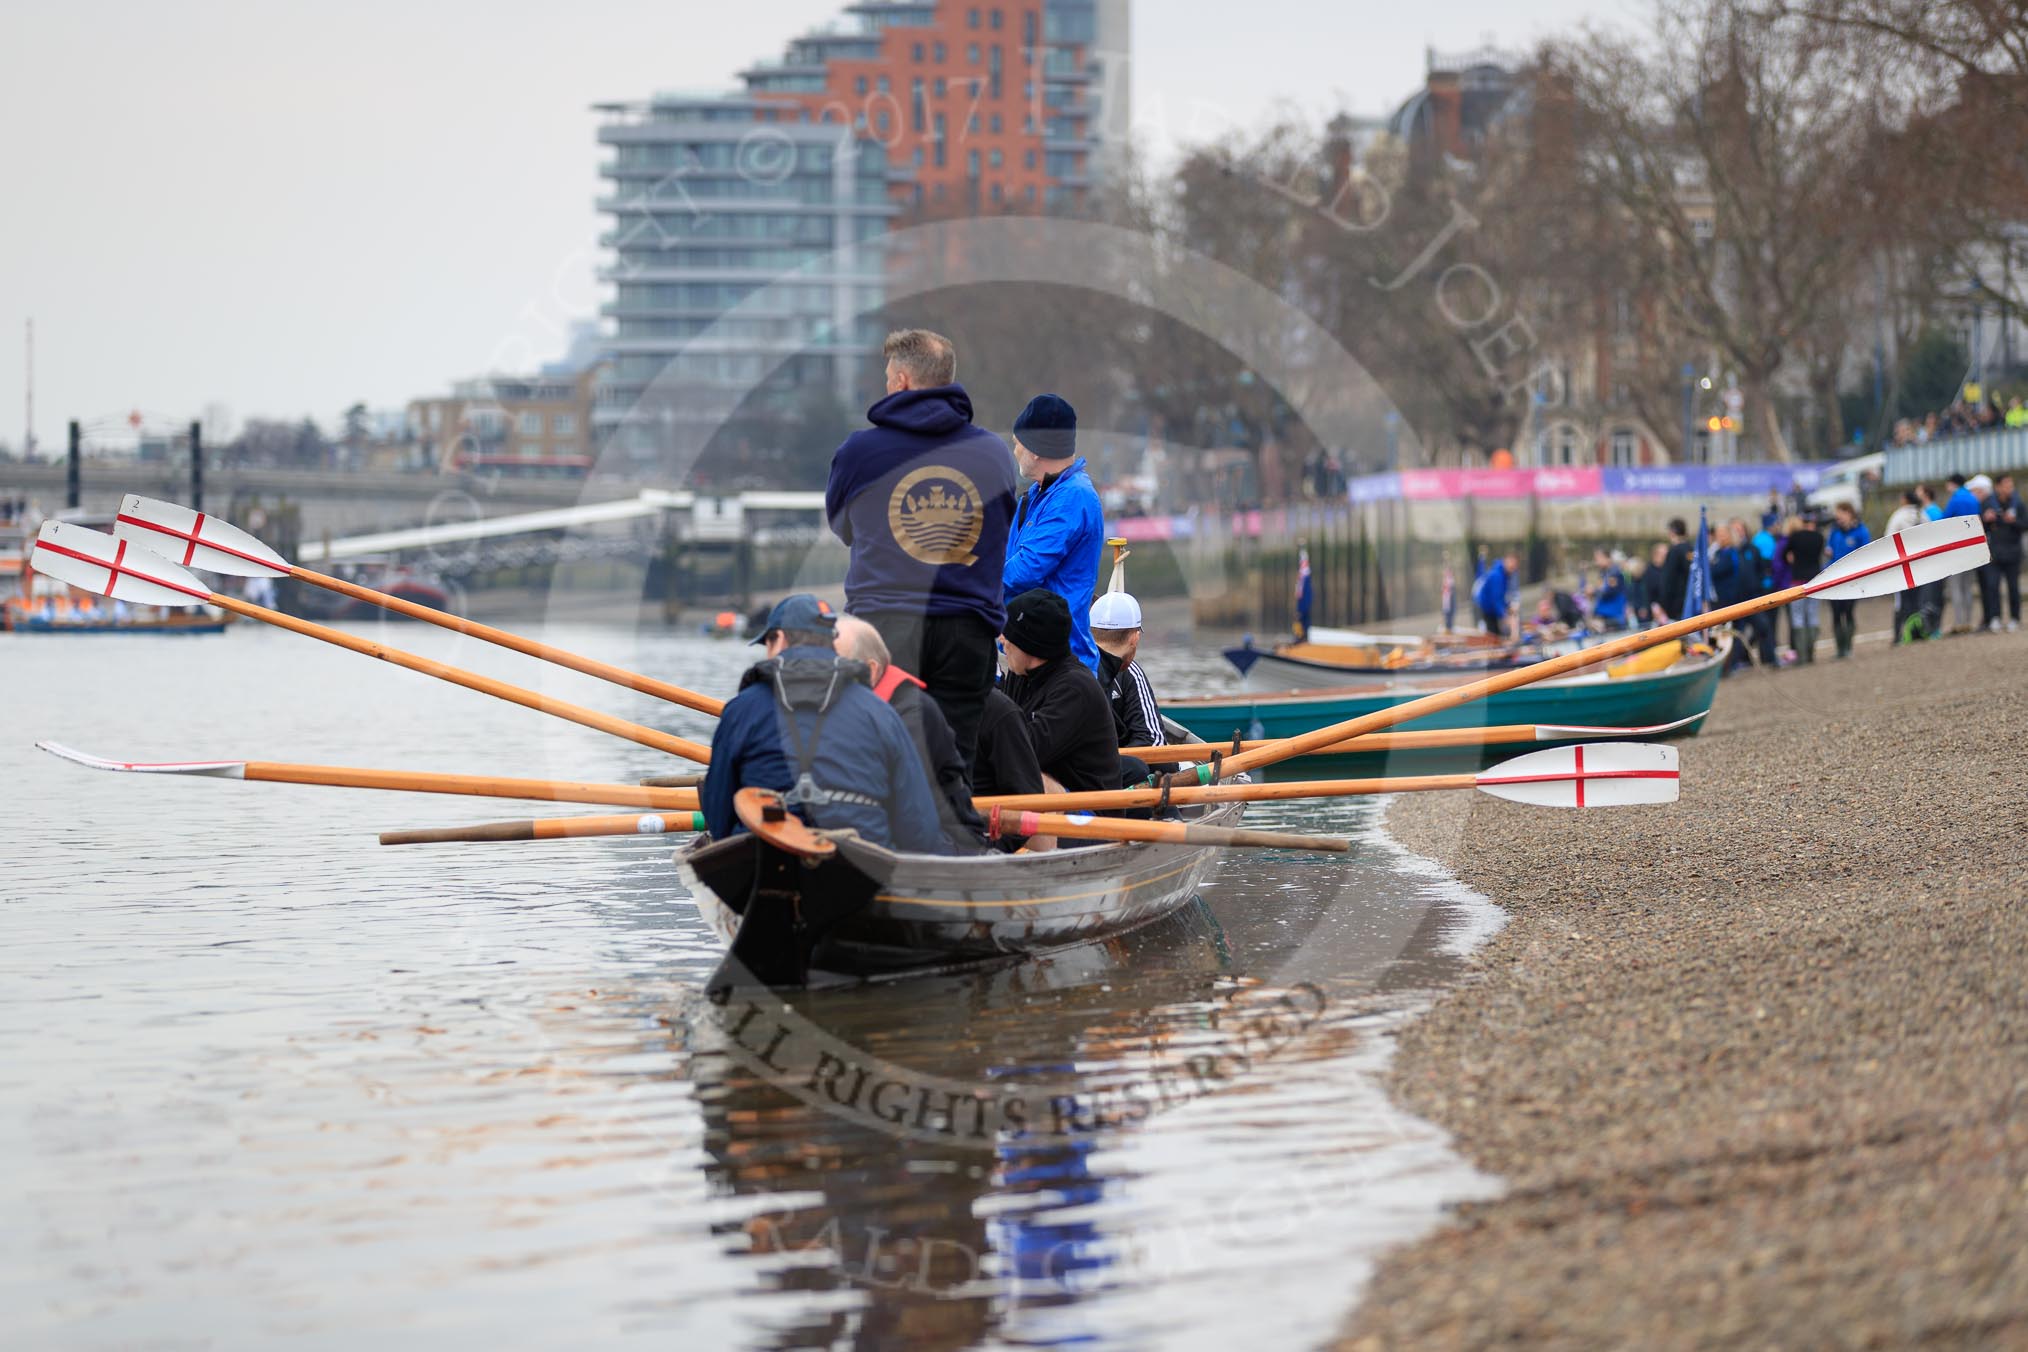 The Cancer Research UK Women's Boat Race 2018: One of the historic rowing boats that keep the public entertained before the race.
River Thames between Putney Bridge and Mortlake,
London SW15,

United Kingdom,
on 24 March 2018 at 15:14, image #75